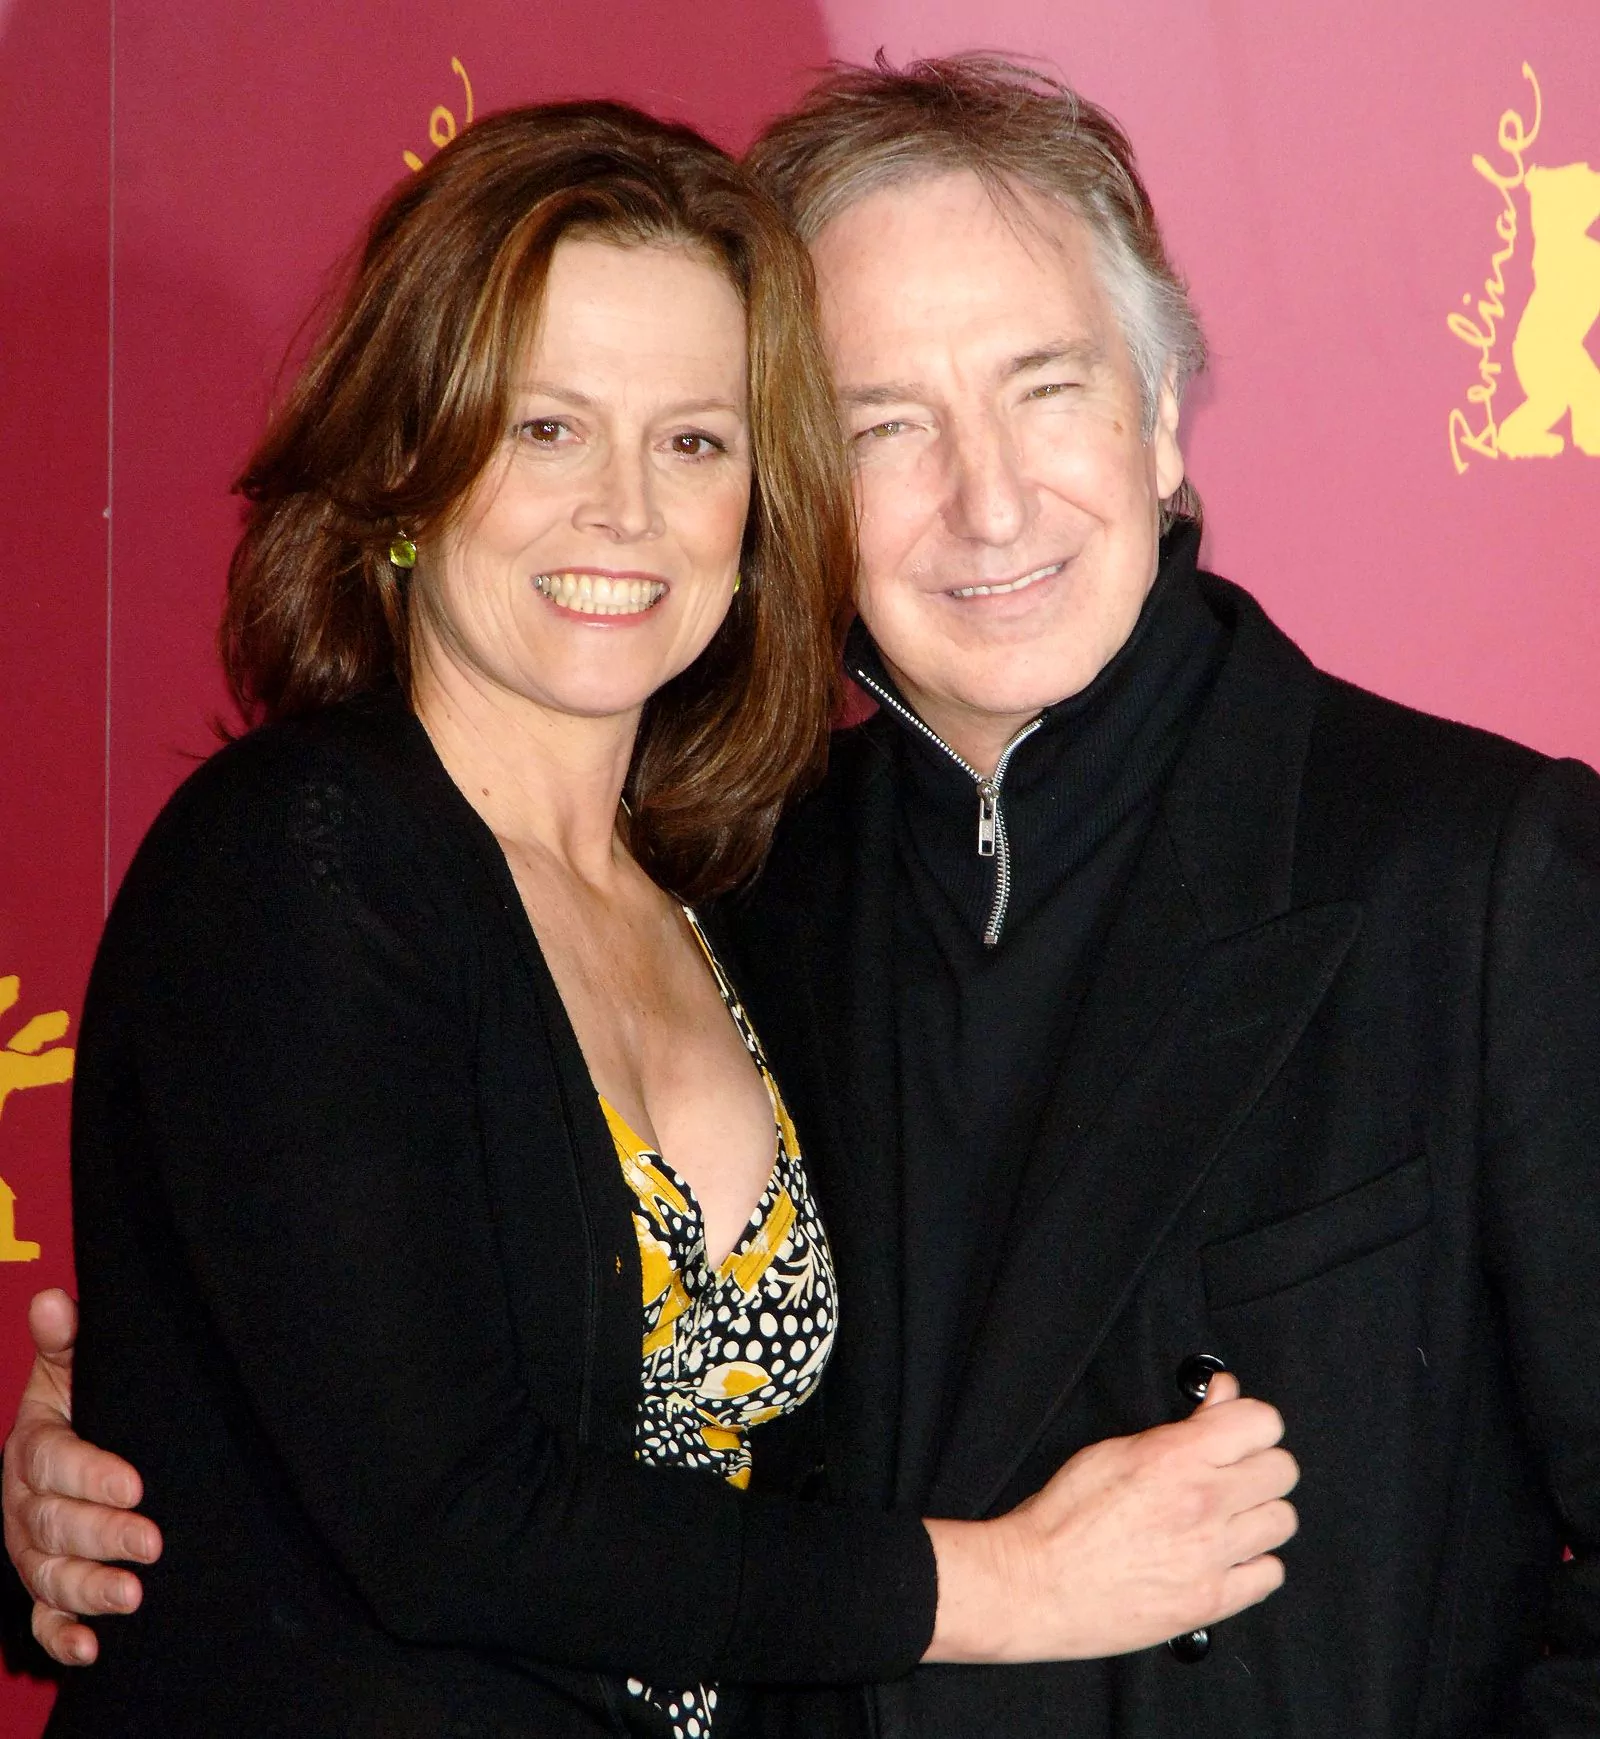 Sigourney Weaver and Alan Rickman at the photo call for the film "Snow Pie" at the 56th Berlin Film Festival, February 9, 2006.